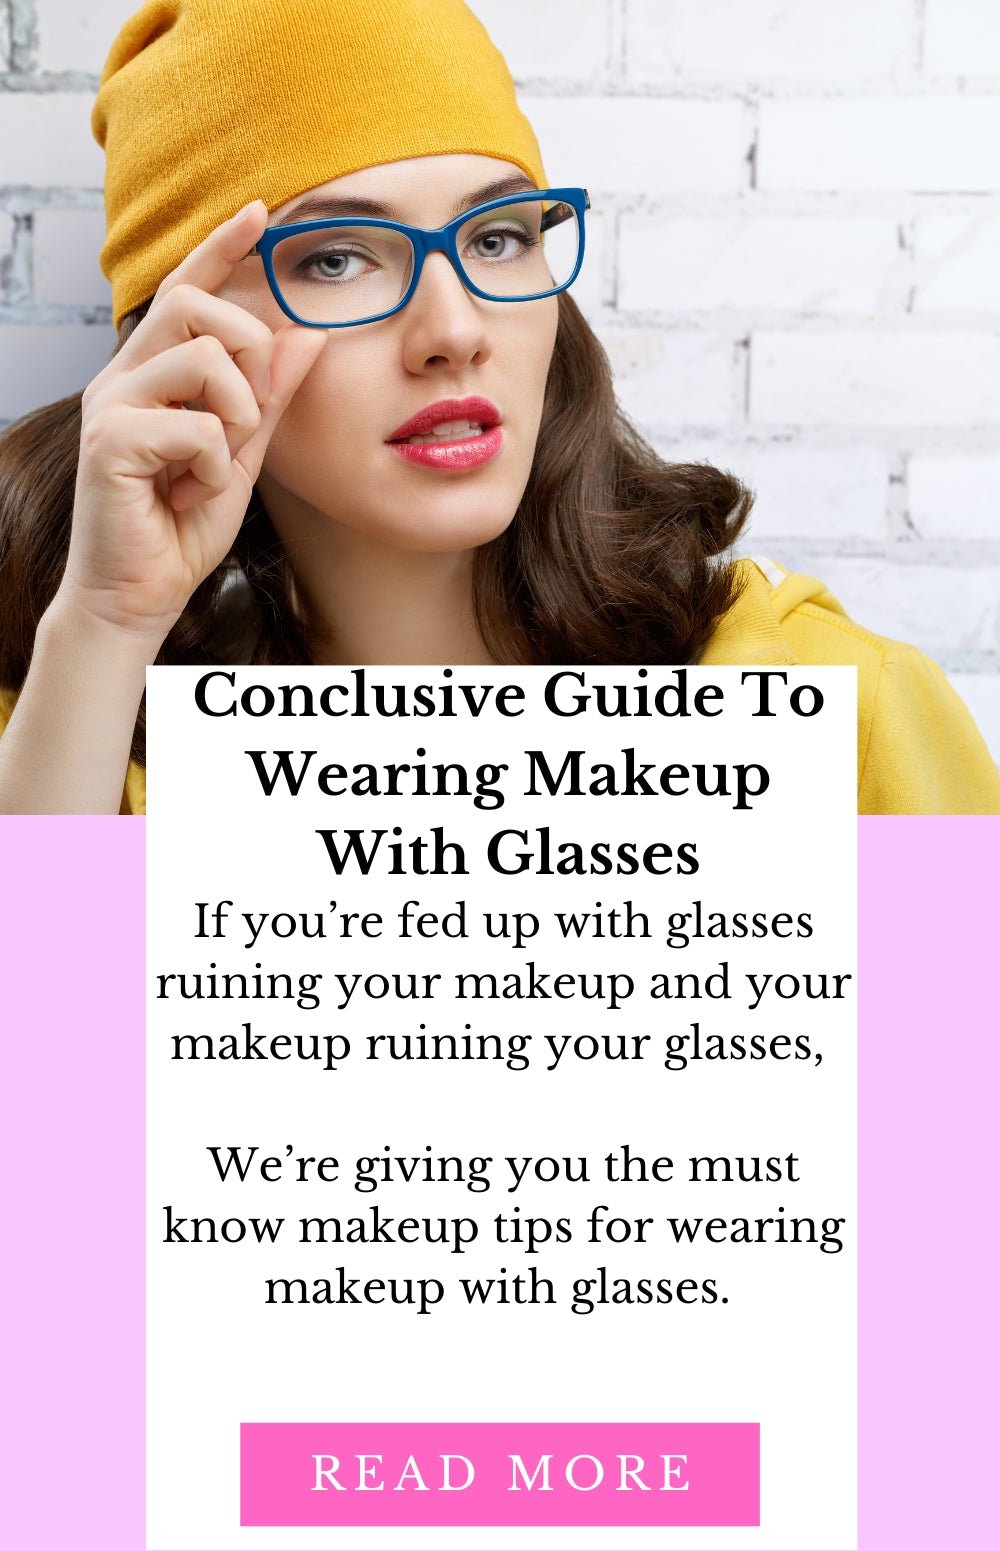 Conclusive Guide To Wearing Makeup With Glasses - TGC Boutique